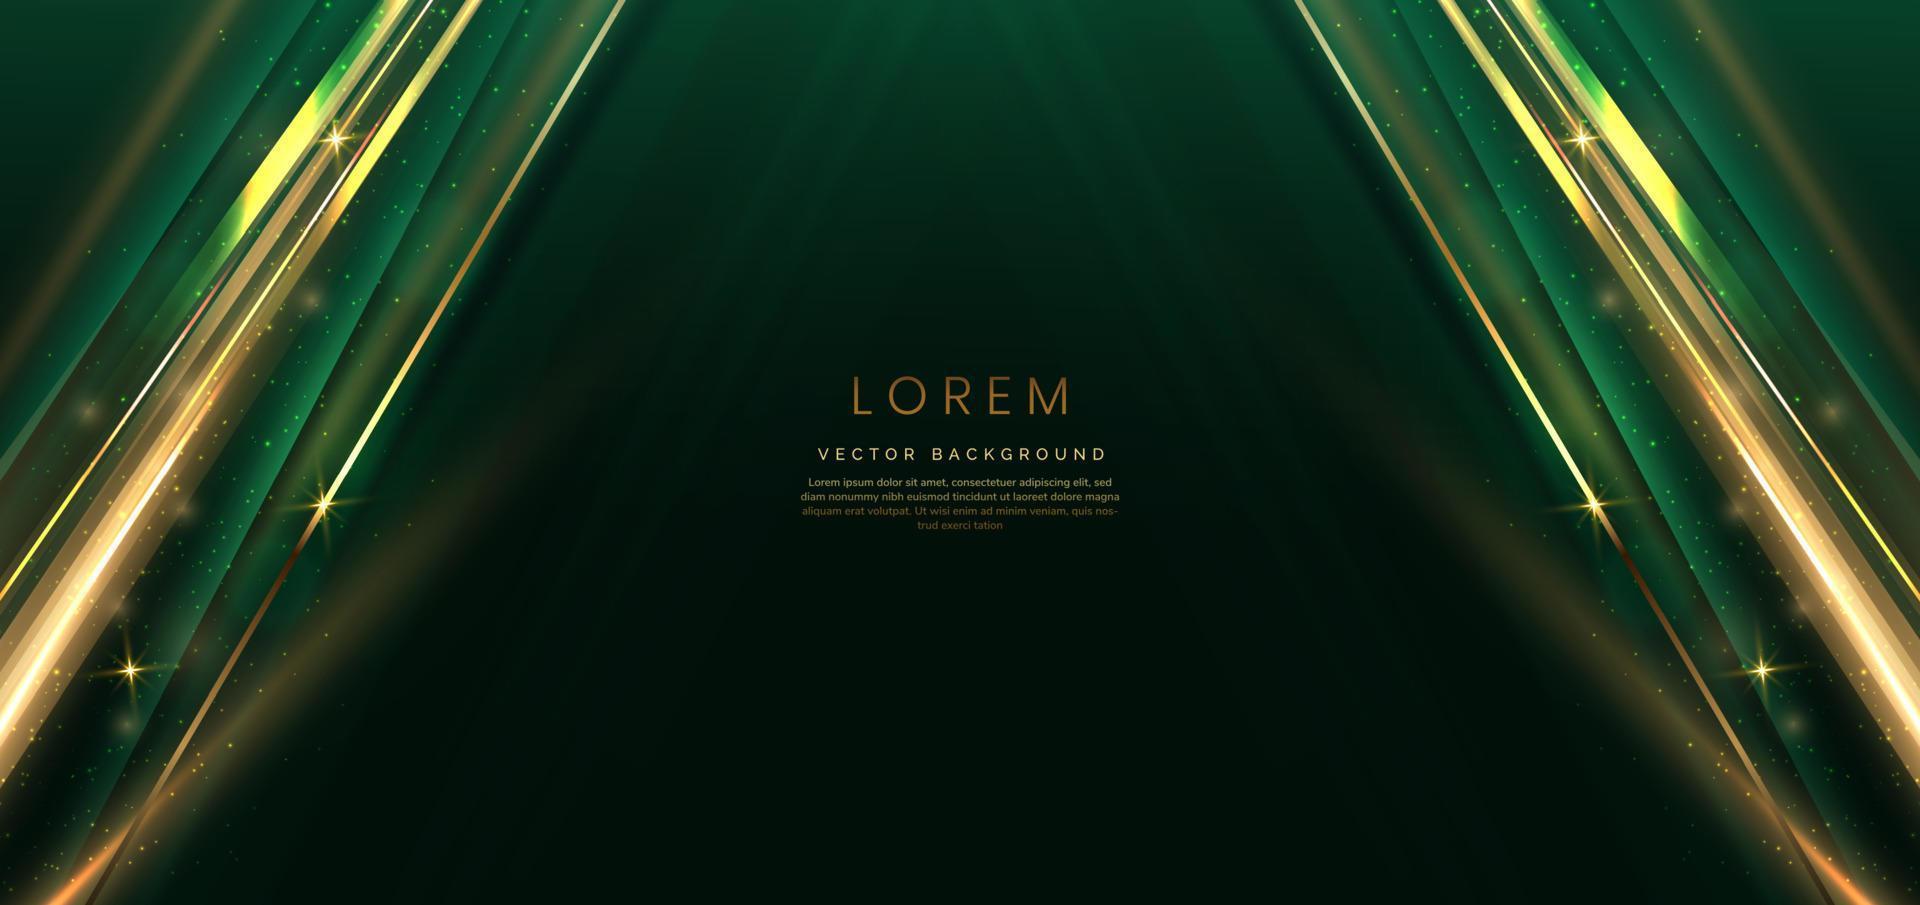 Abstract elegant dark green background with golden line and lighting effect sparkle. Luxury template design. vector